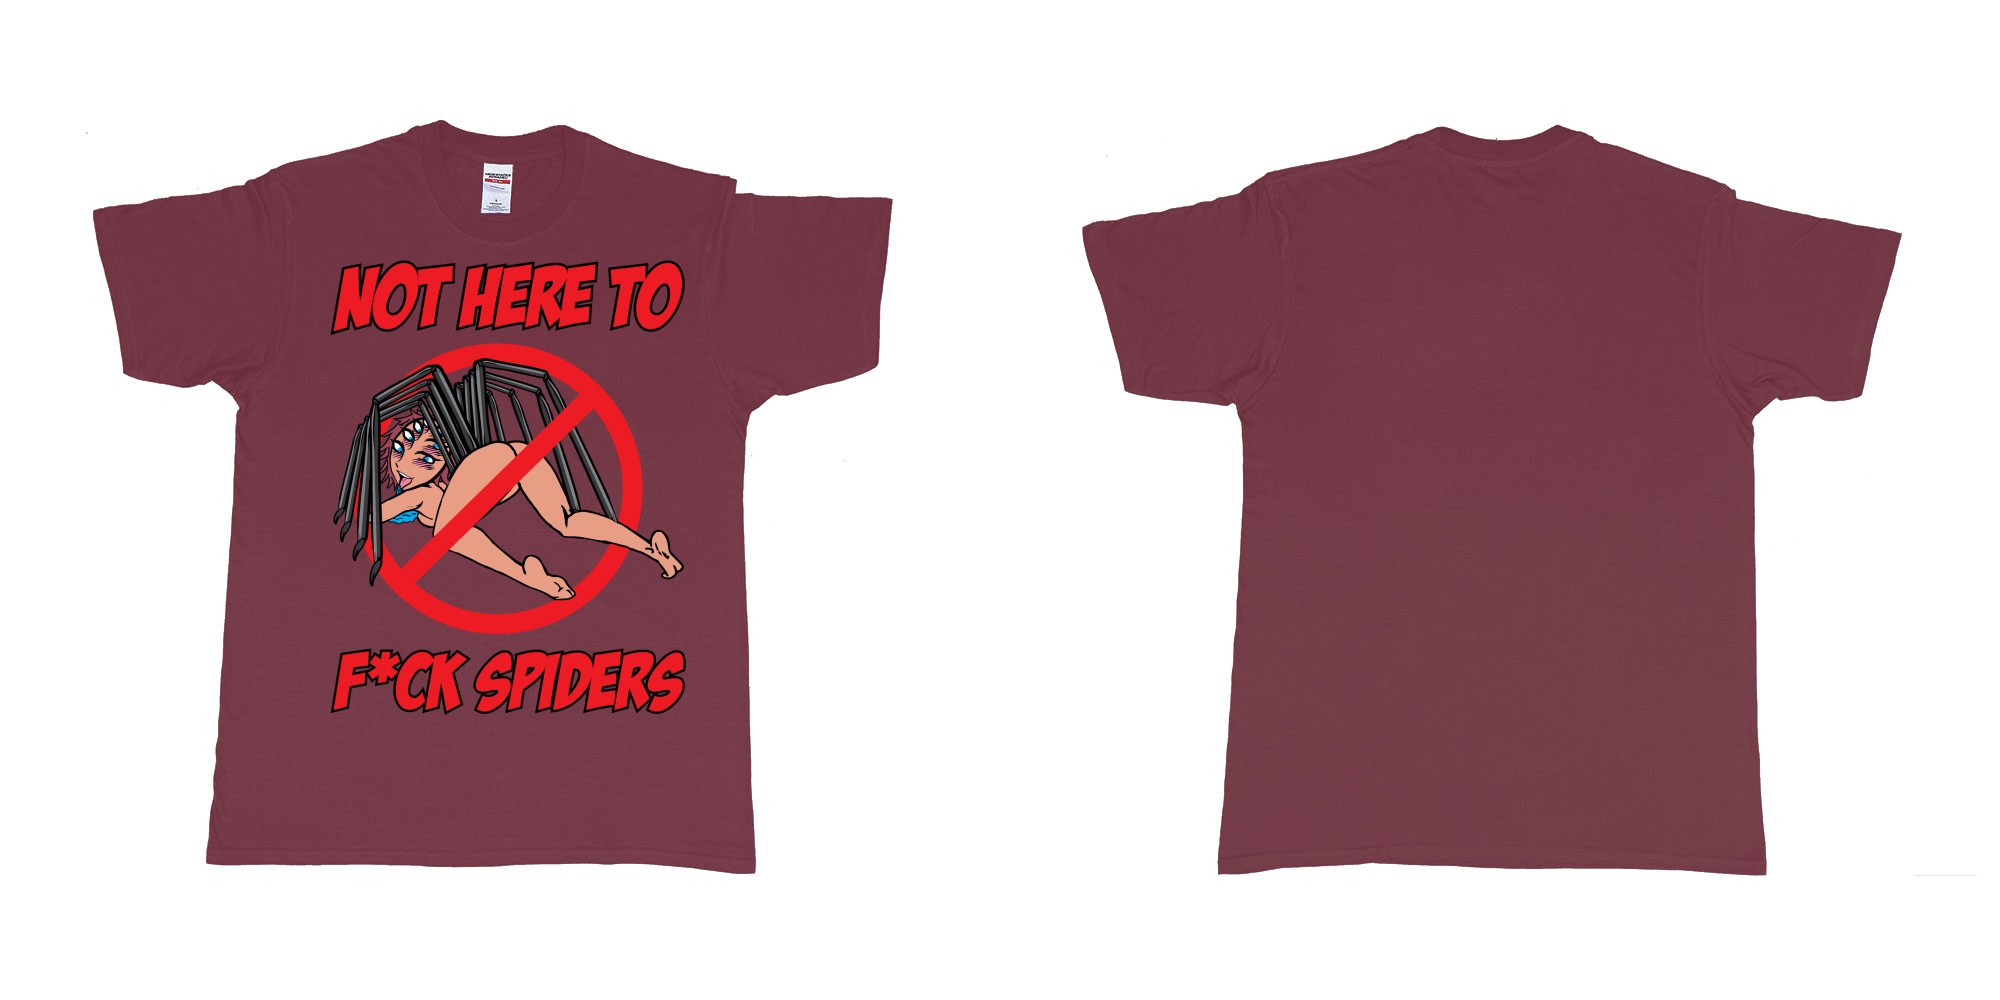 Custom tshirt design not here to fuck spiders sexy spider manga girl ahegao in fabric color marron choice your own text made in Bali by The Pirate Way